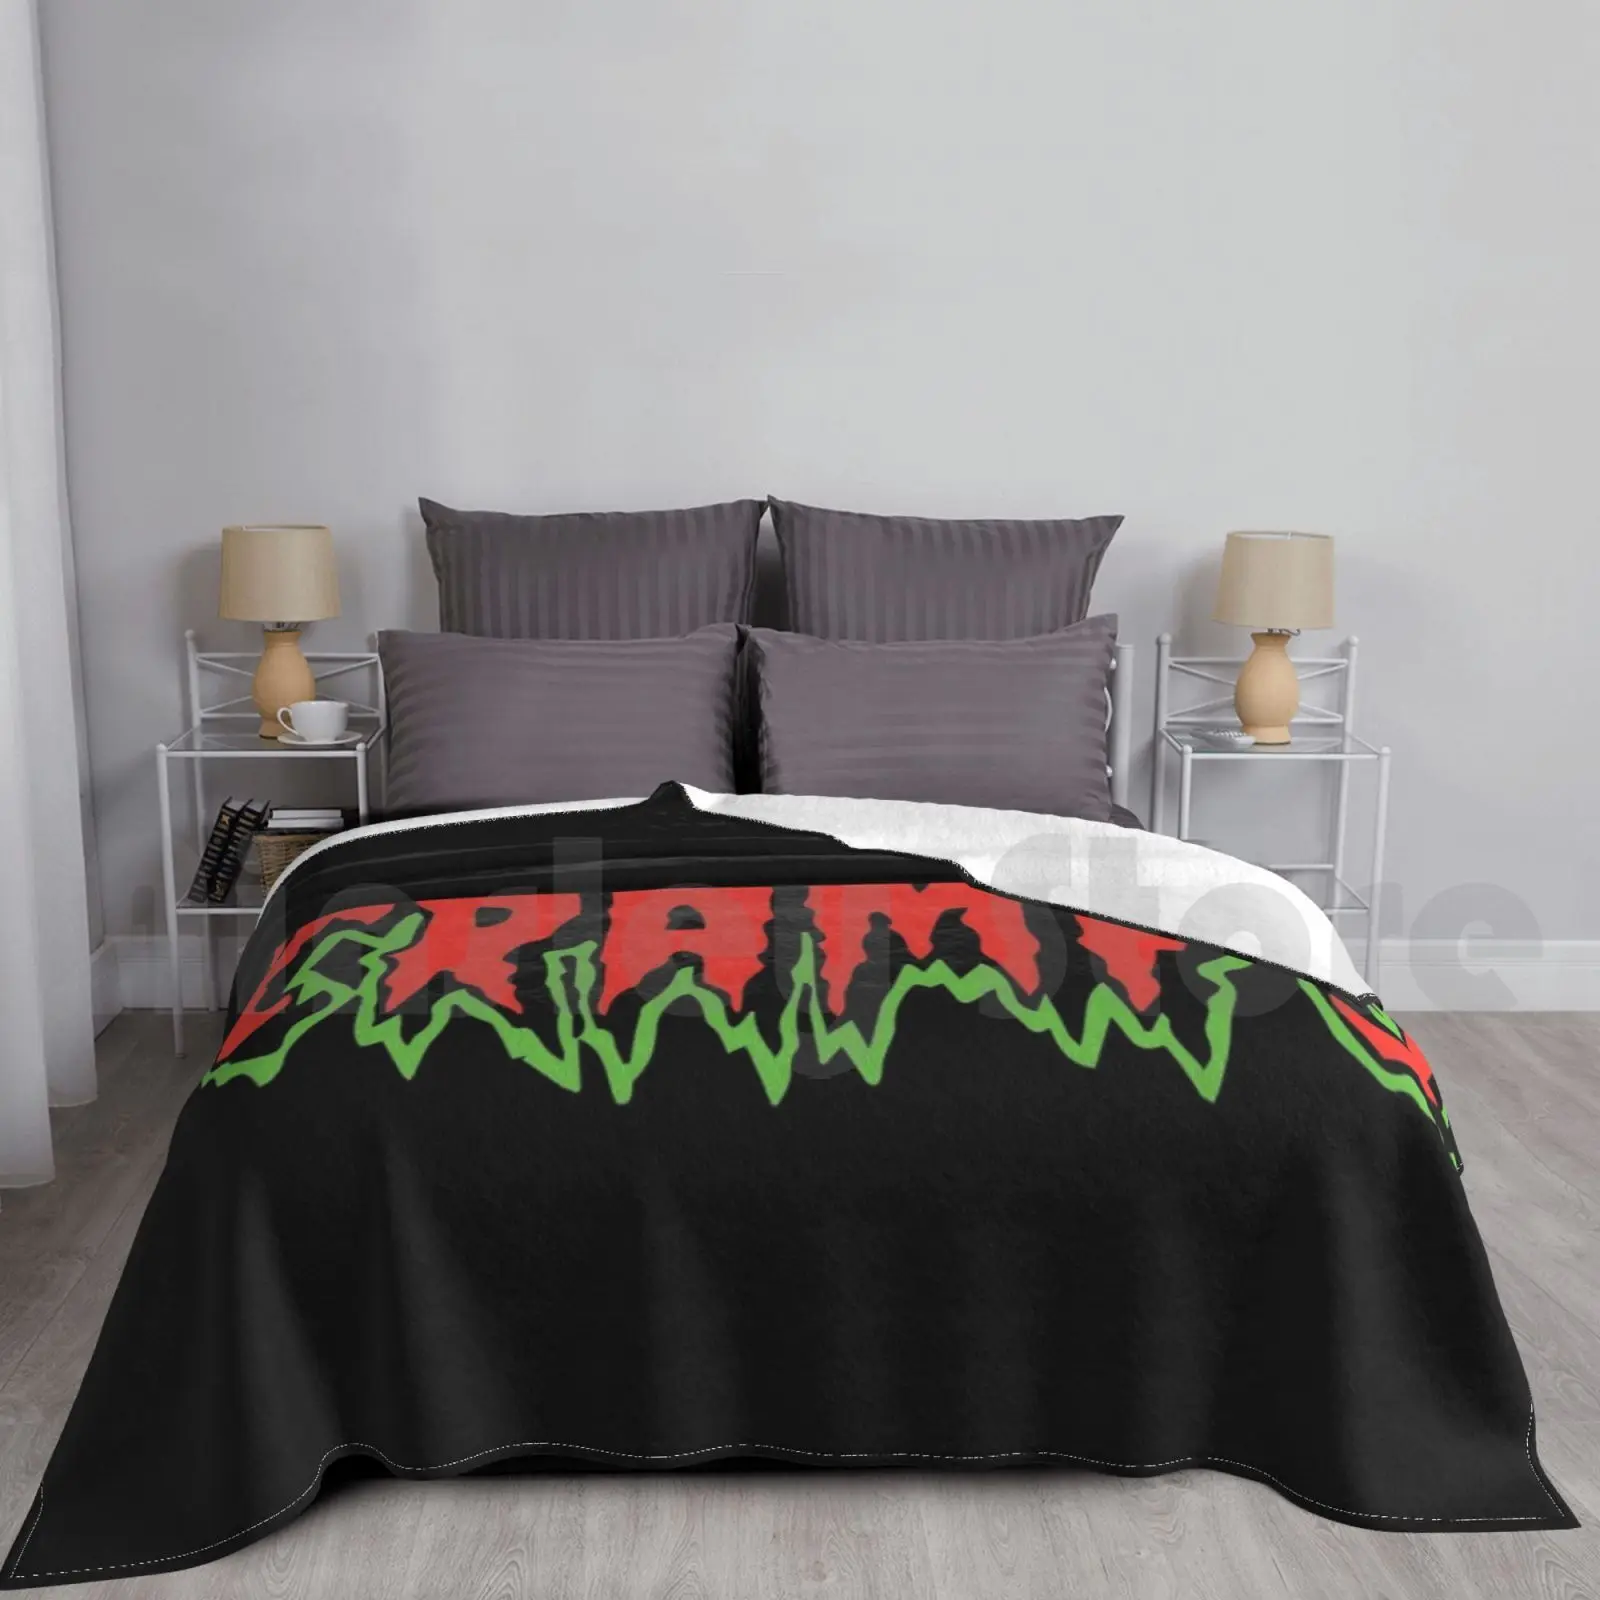 

Cramps Blanket For Sofa Bed Travel Cramps The Cramps Band Punk Rock Psychobilly